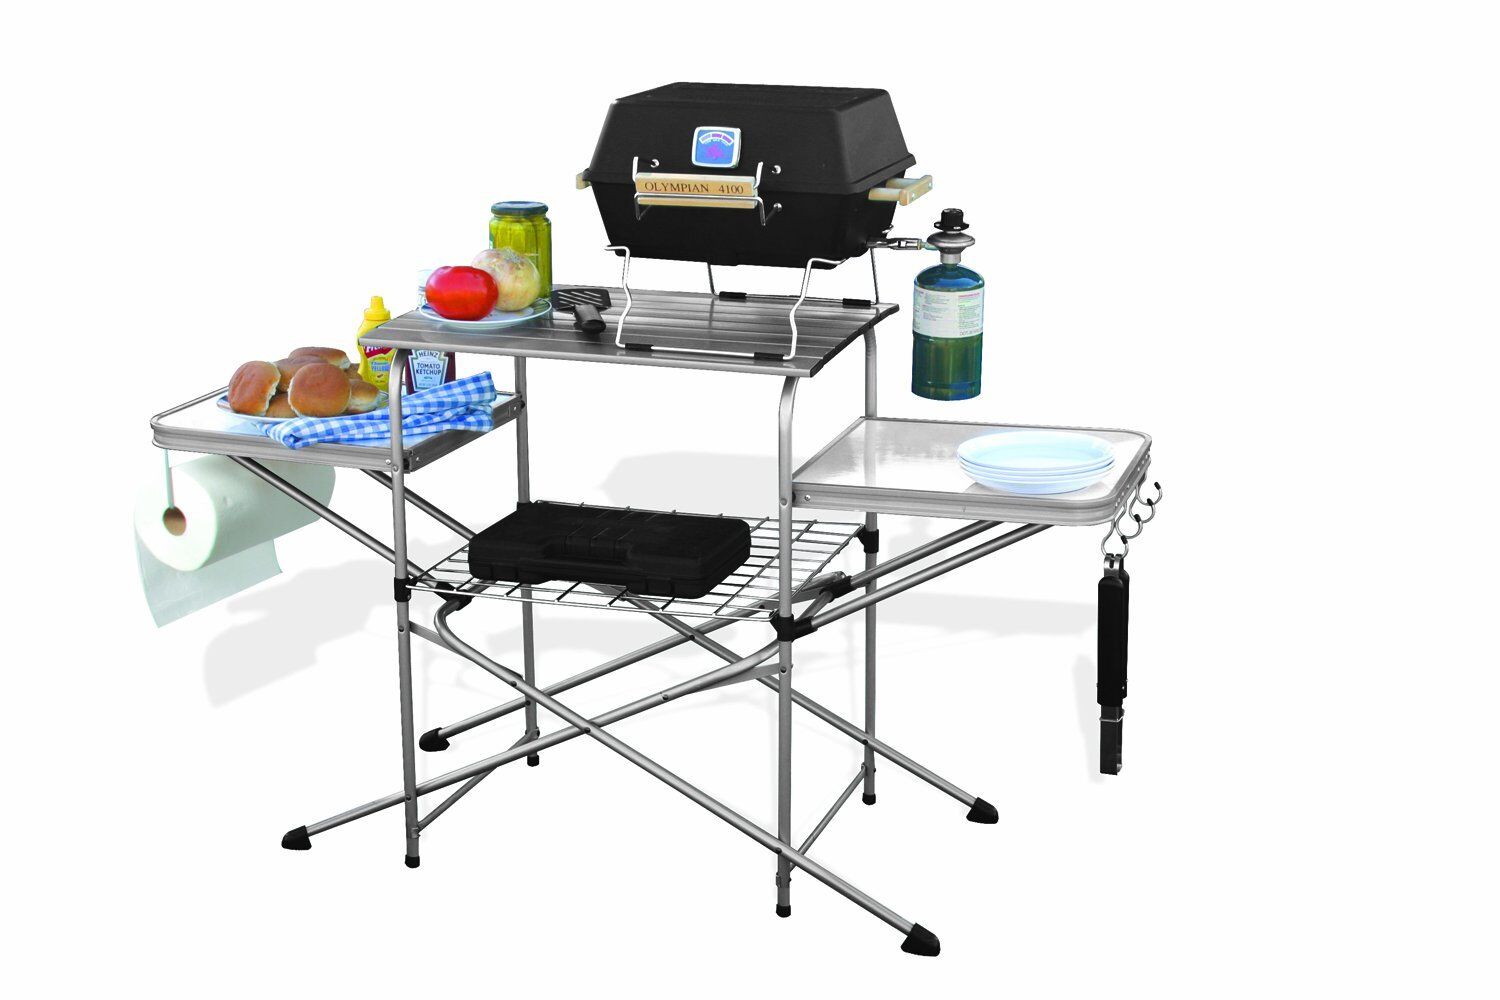 deluxe grilling table